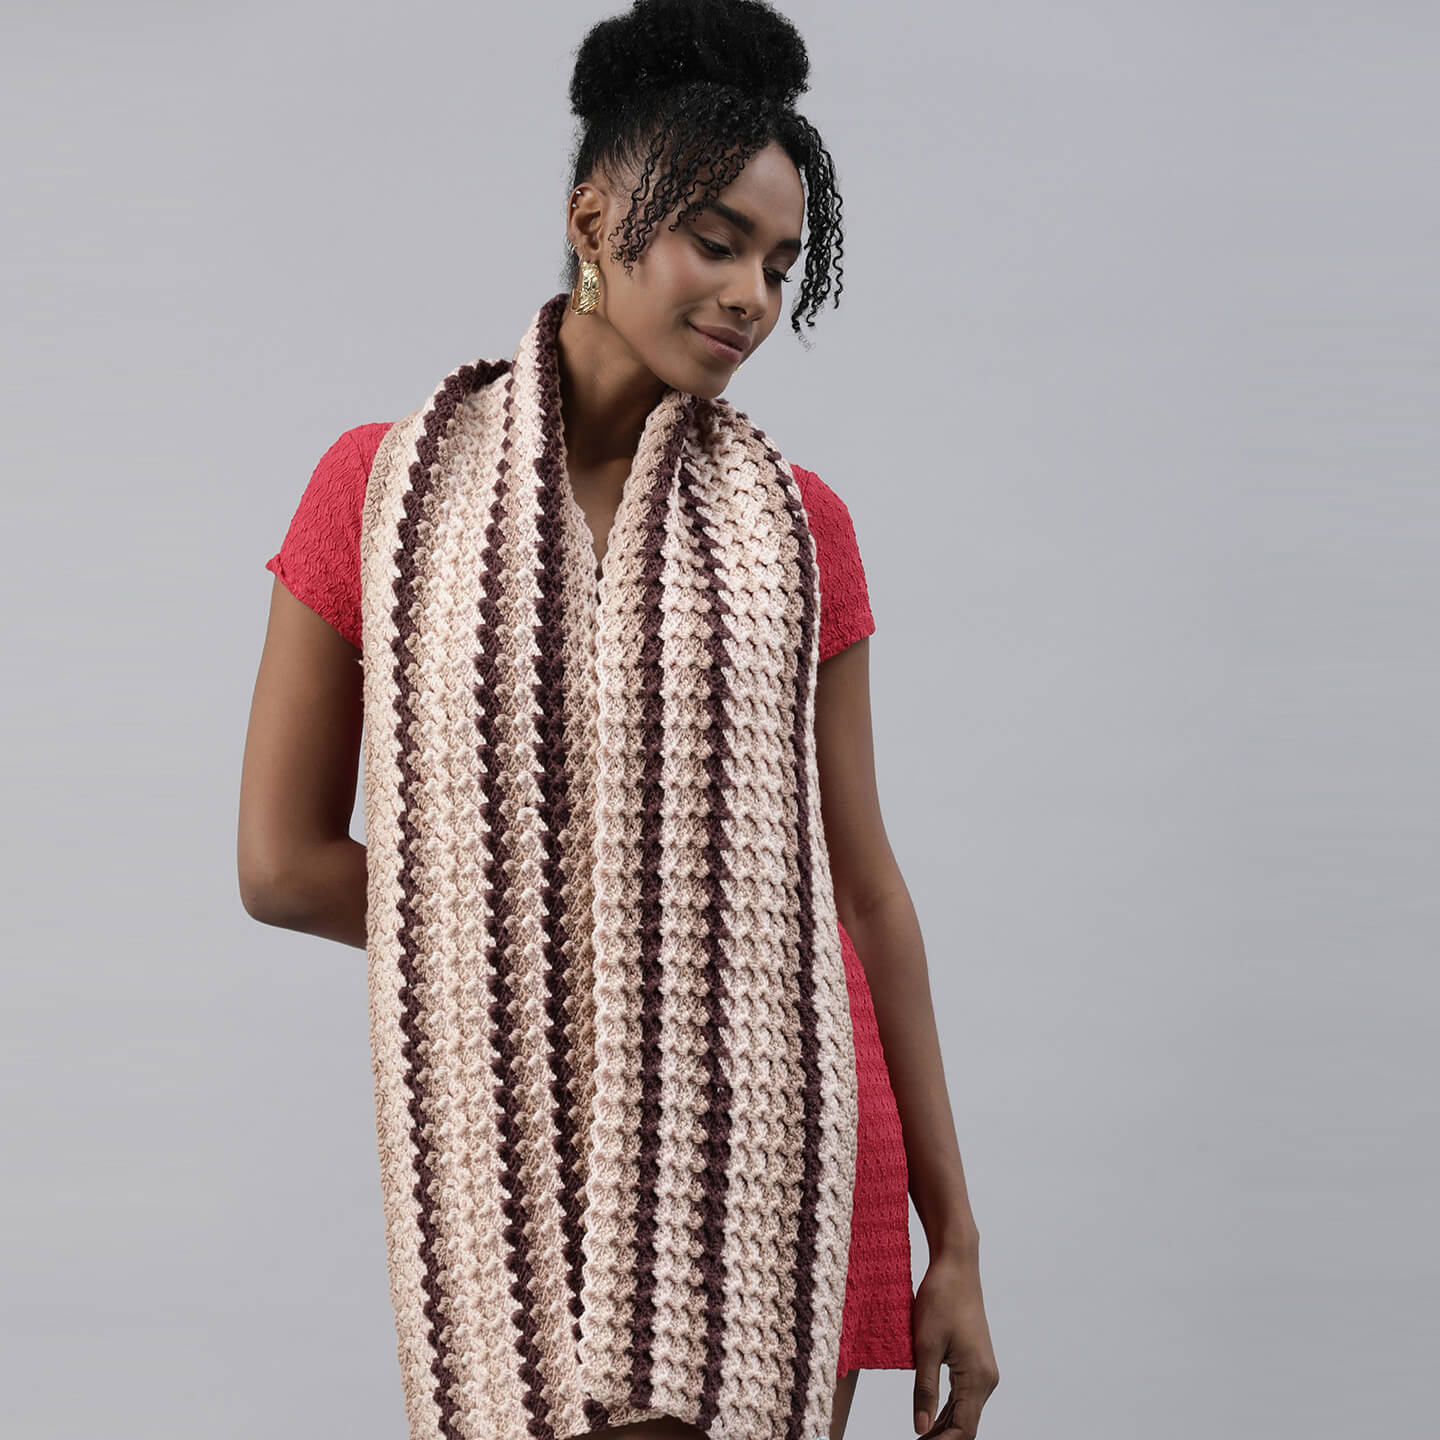 Shades of Brown Scarf - 3098